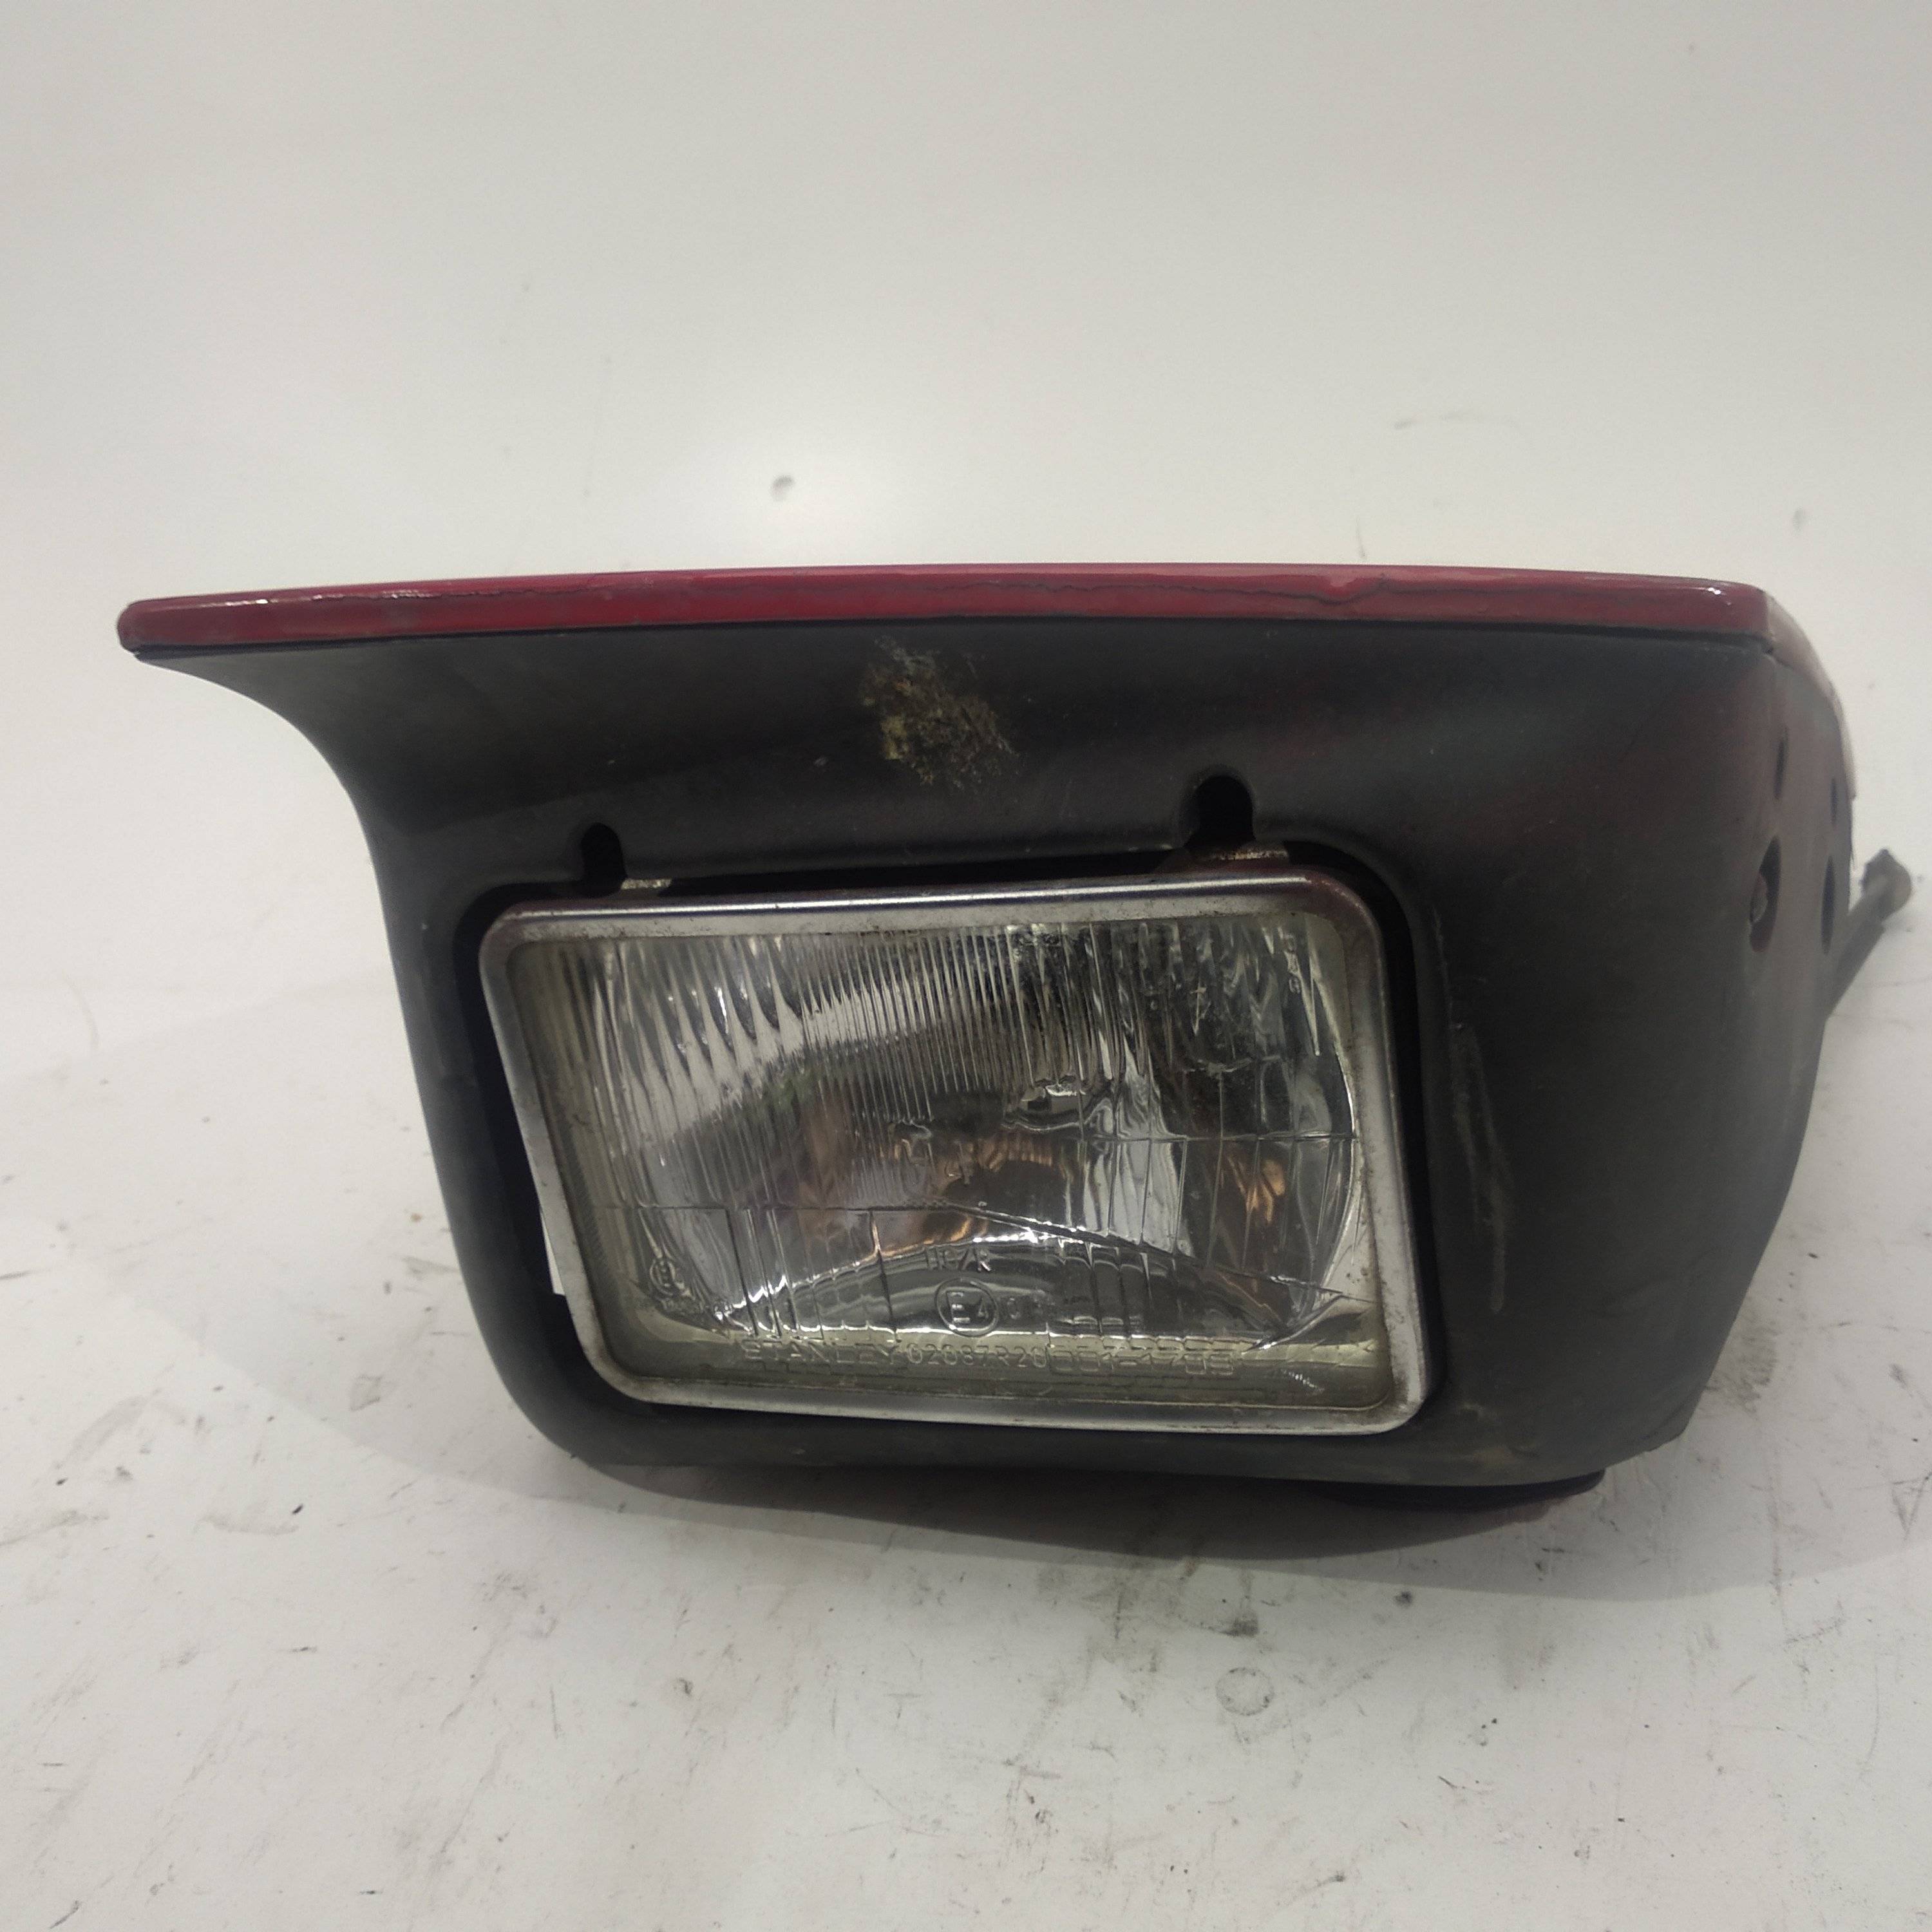 FORD USA Probe 1 generation (1988-1993) Front Left Headlight 02087R20, 02087R20, 02087R20 24511880